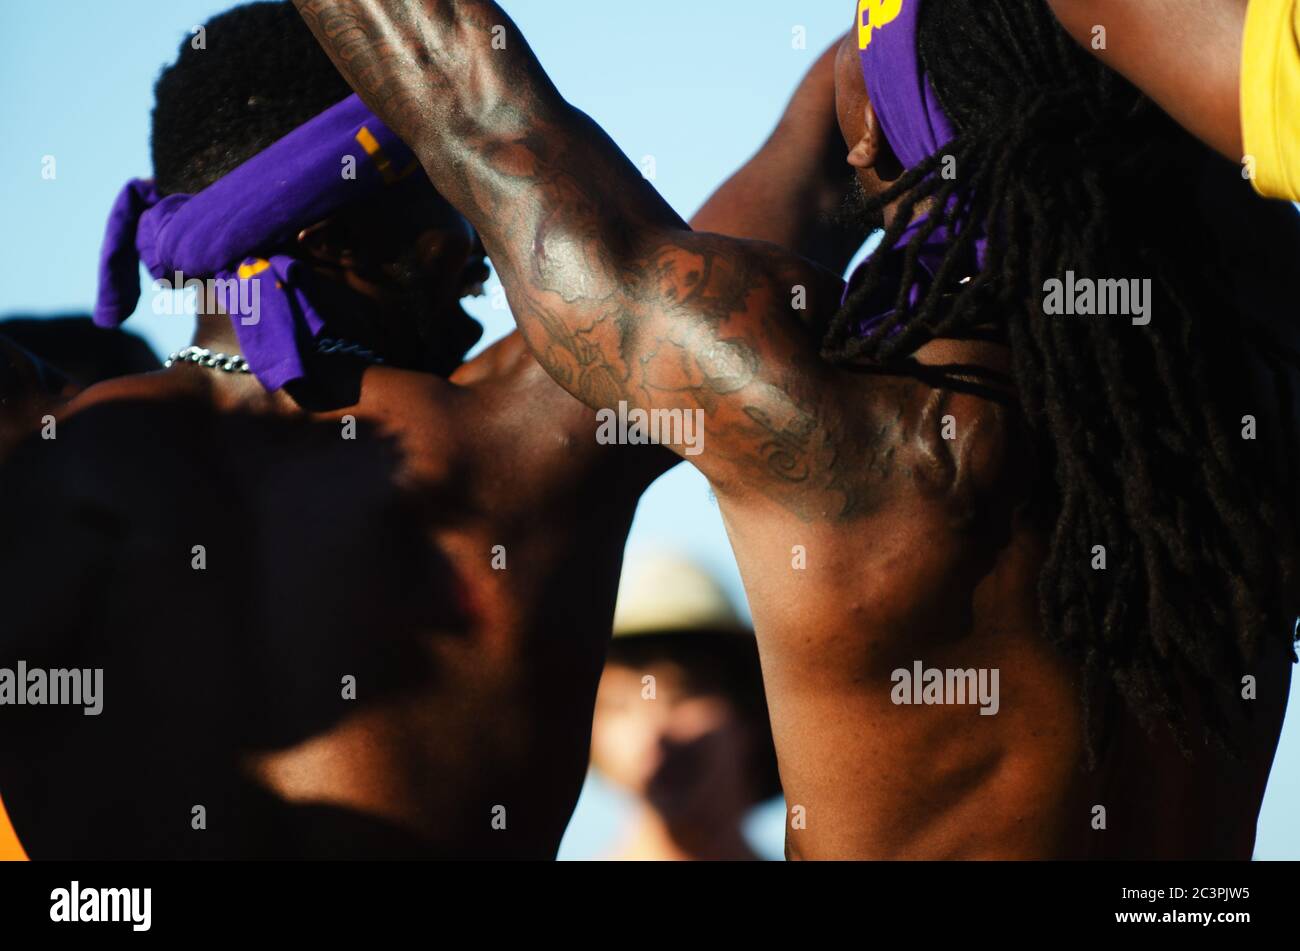 MIAMI - MARCH 23, 2019: Young men from the Omega Psi Phi fraternity perform in a step show at a Spring Break party on South Beach. Stock Photo